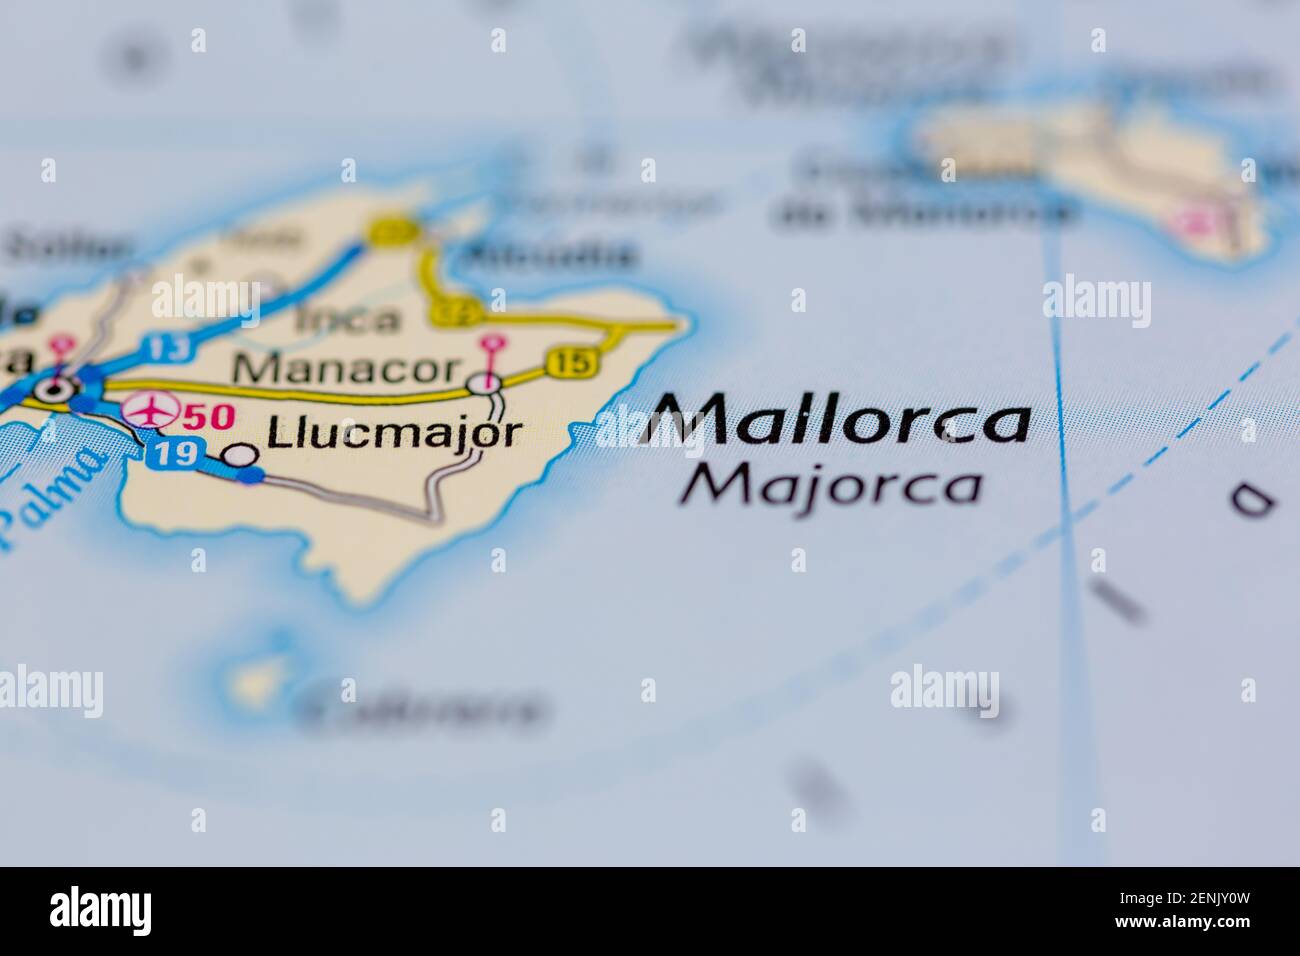 Majorca or Mallorca shown on a Road map or a geography map Stock Photo